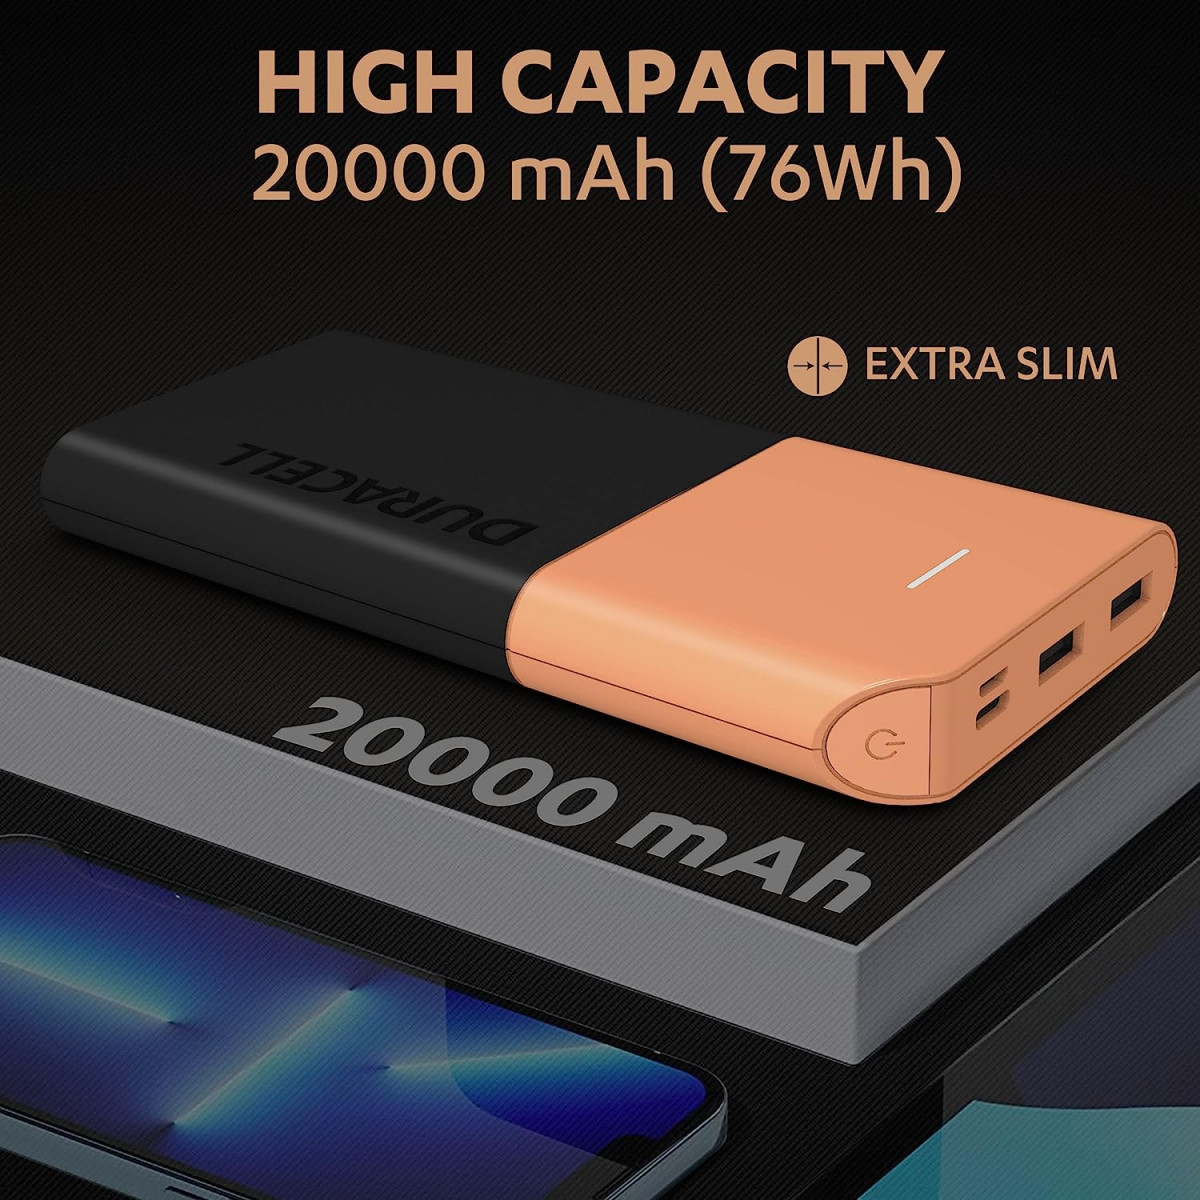 Duracell Powerbank 20000mh with Series 1 - C to C Cable